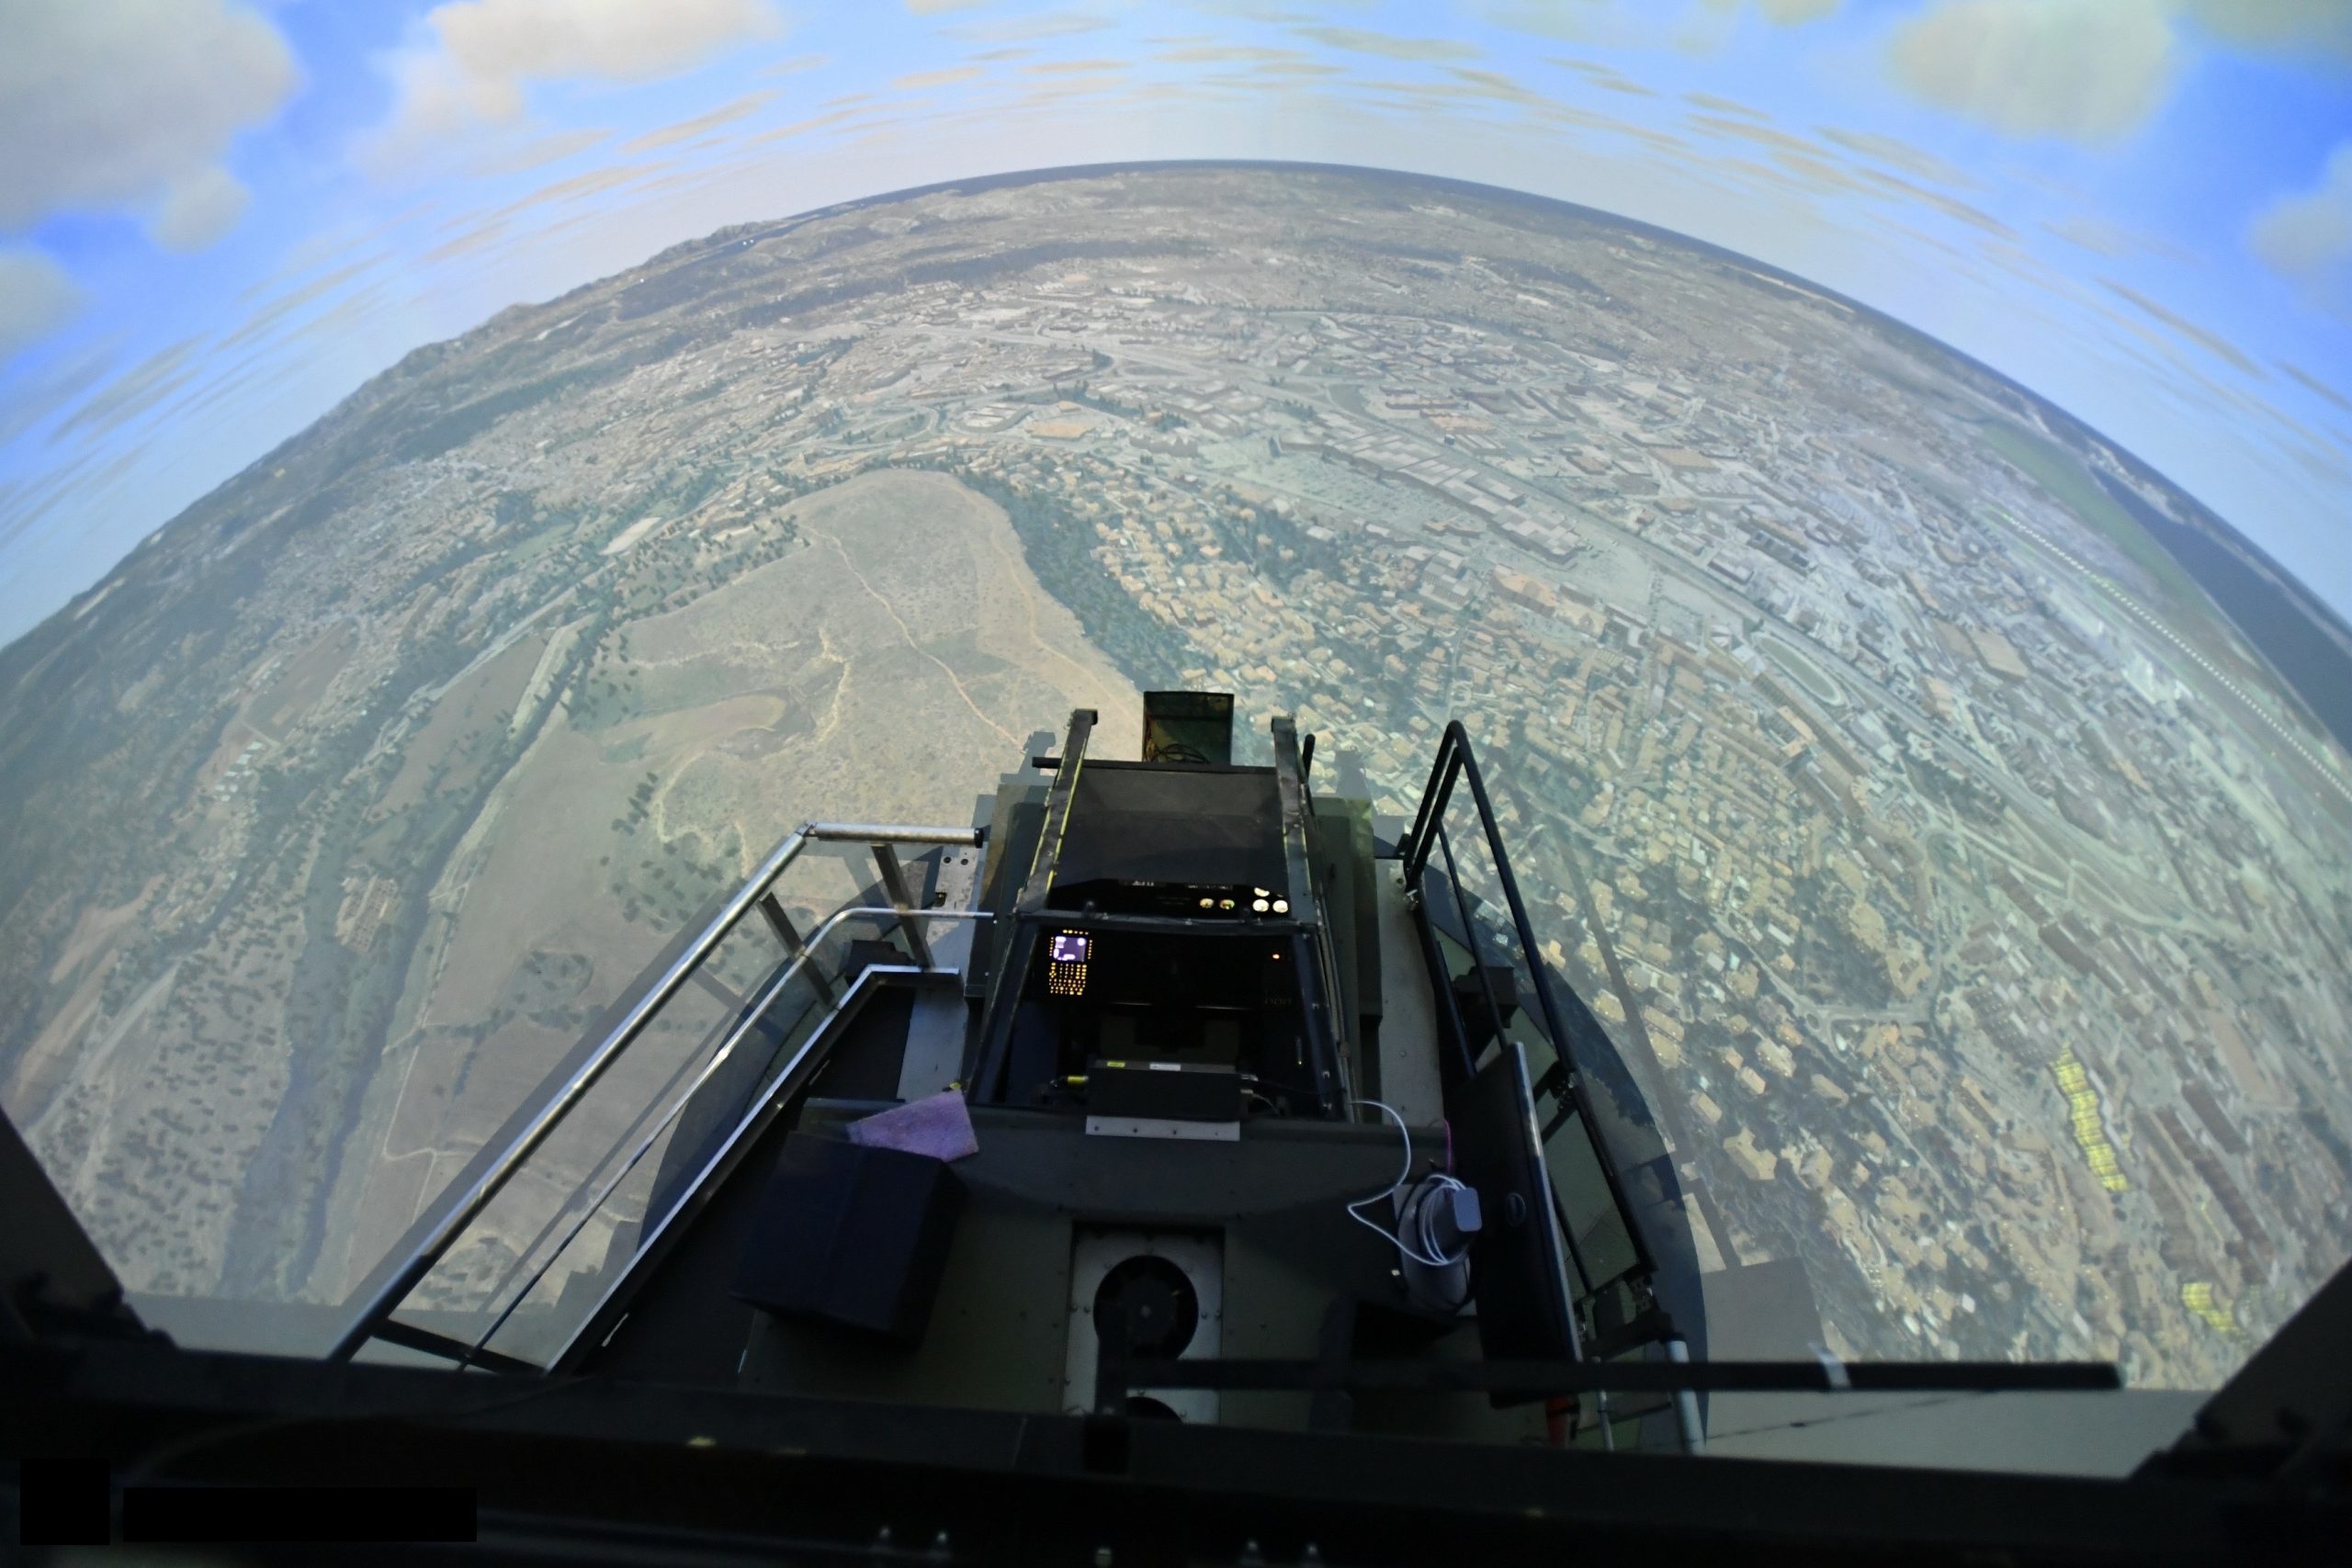 ST Engineering Antycip Equips Tiger Attack Helicopter Simulators